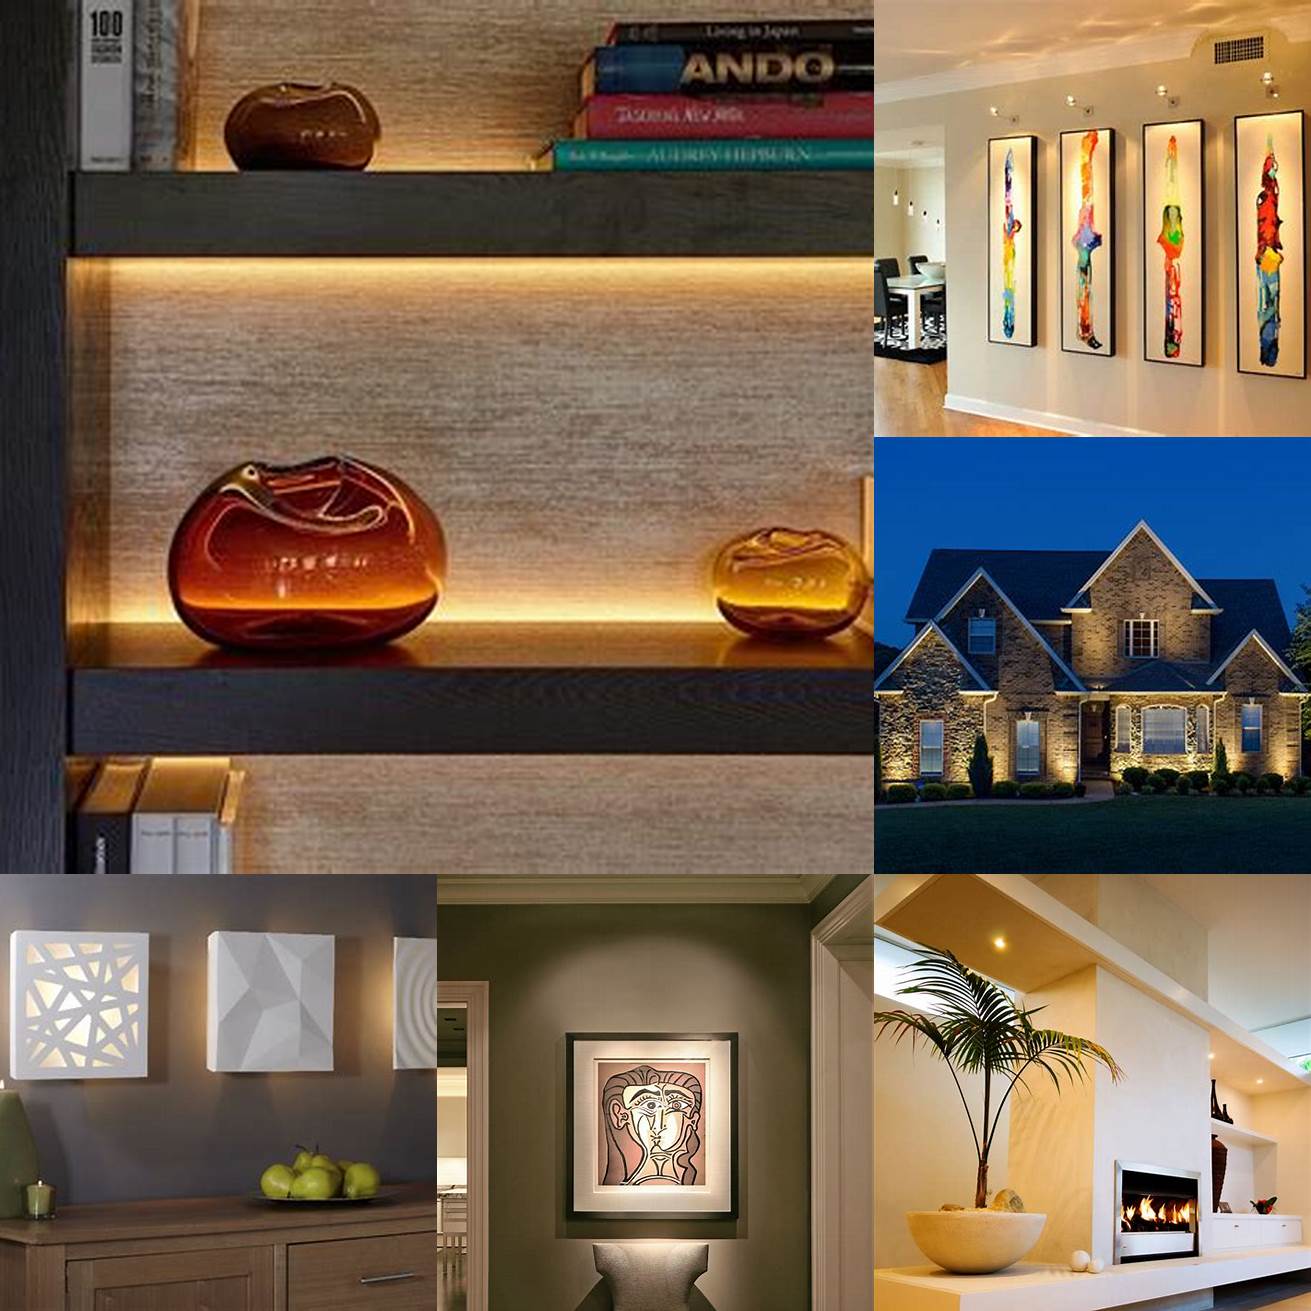 Accent lighting is a great way to highlight architectural features artwork or other decorative elements in your home